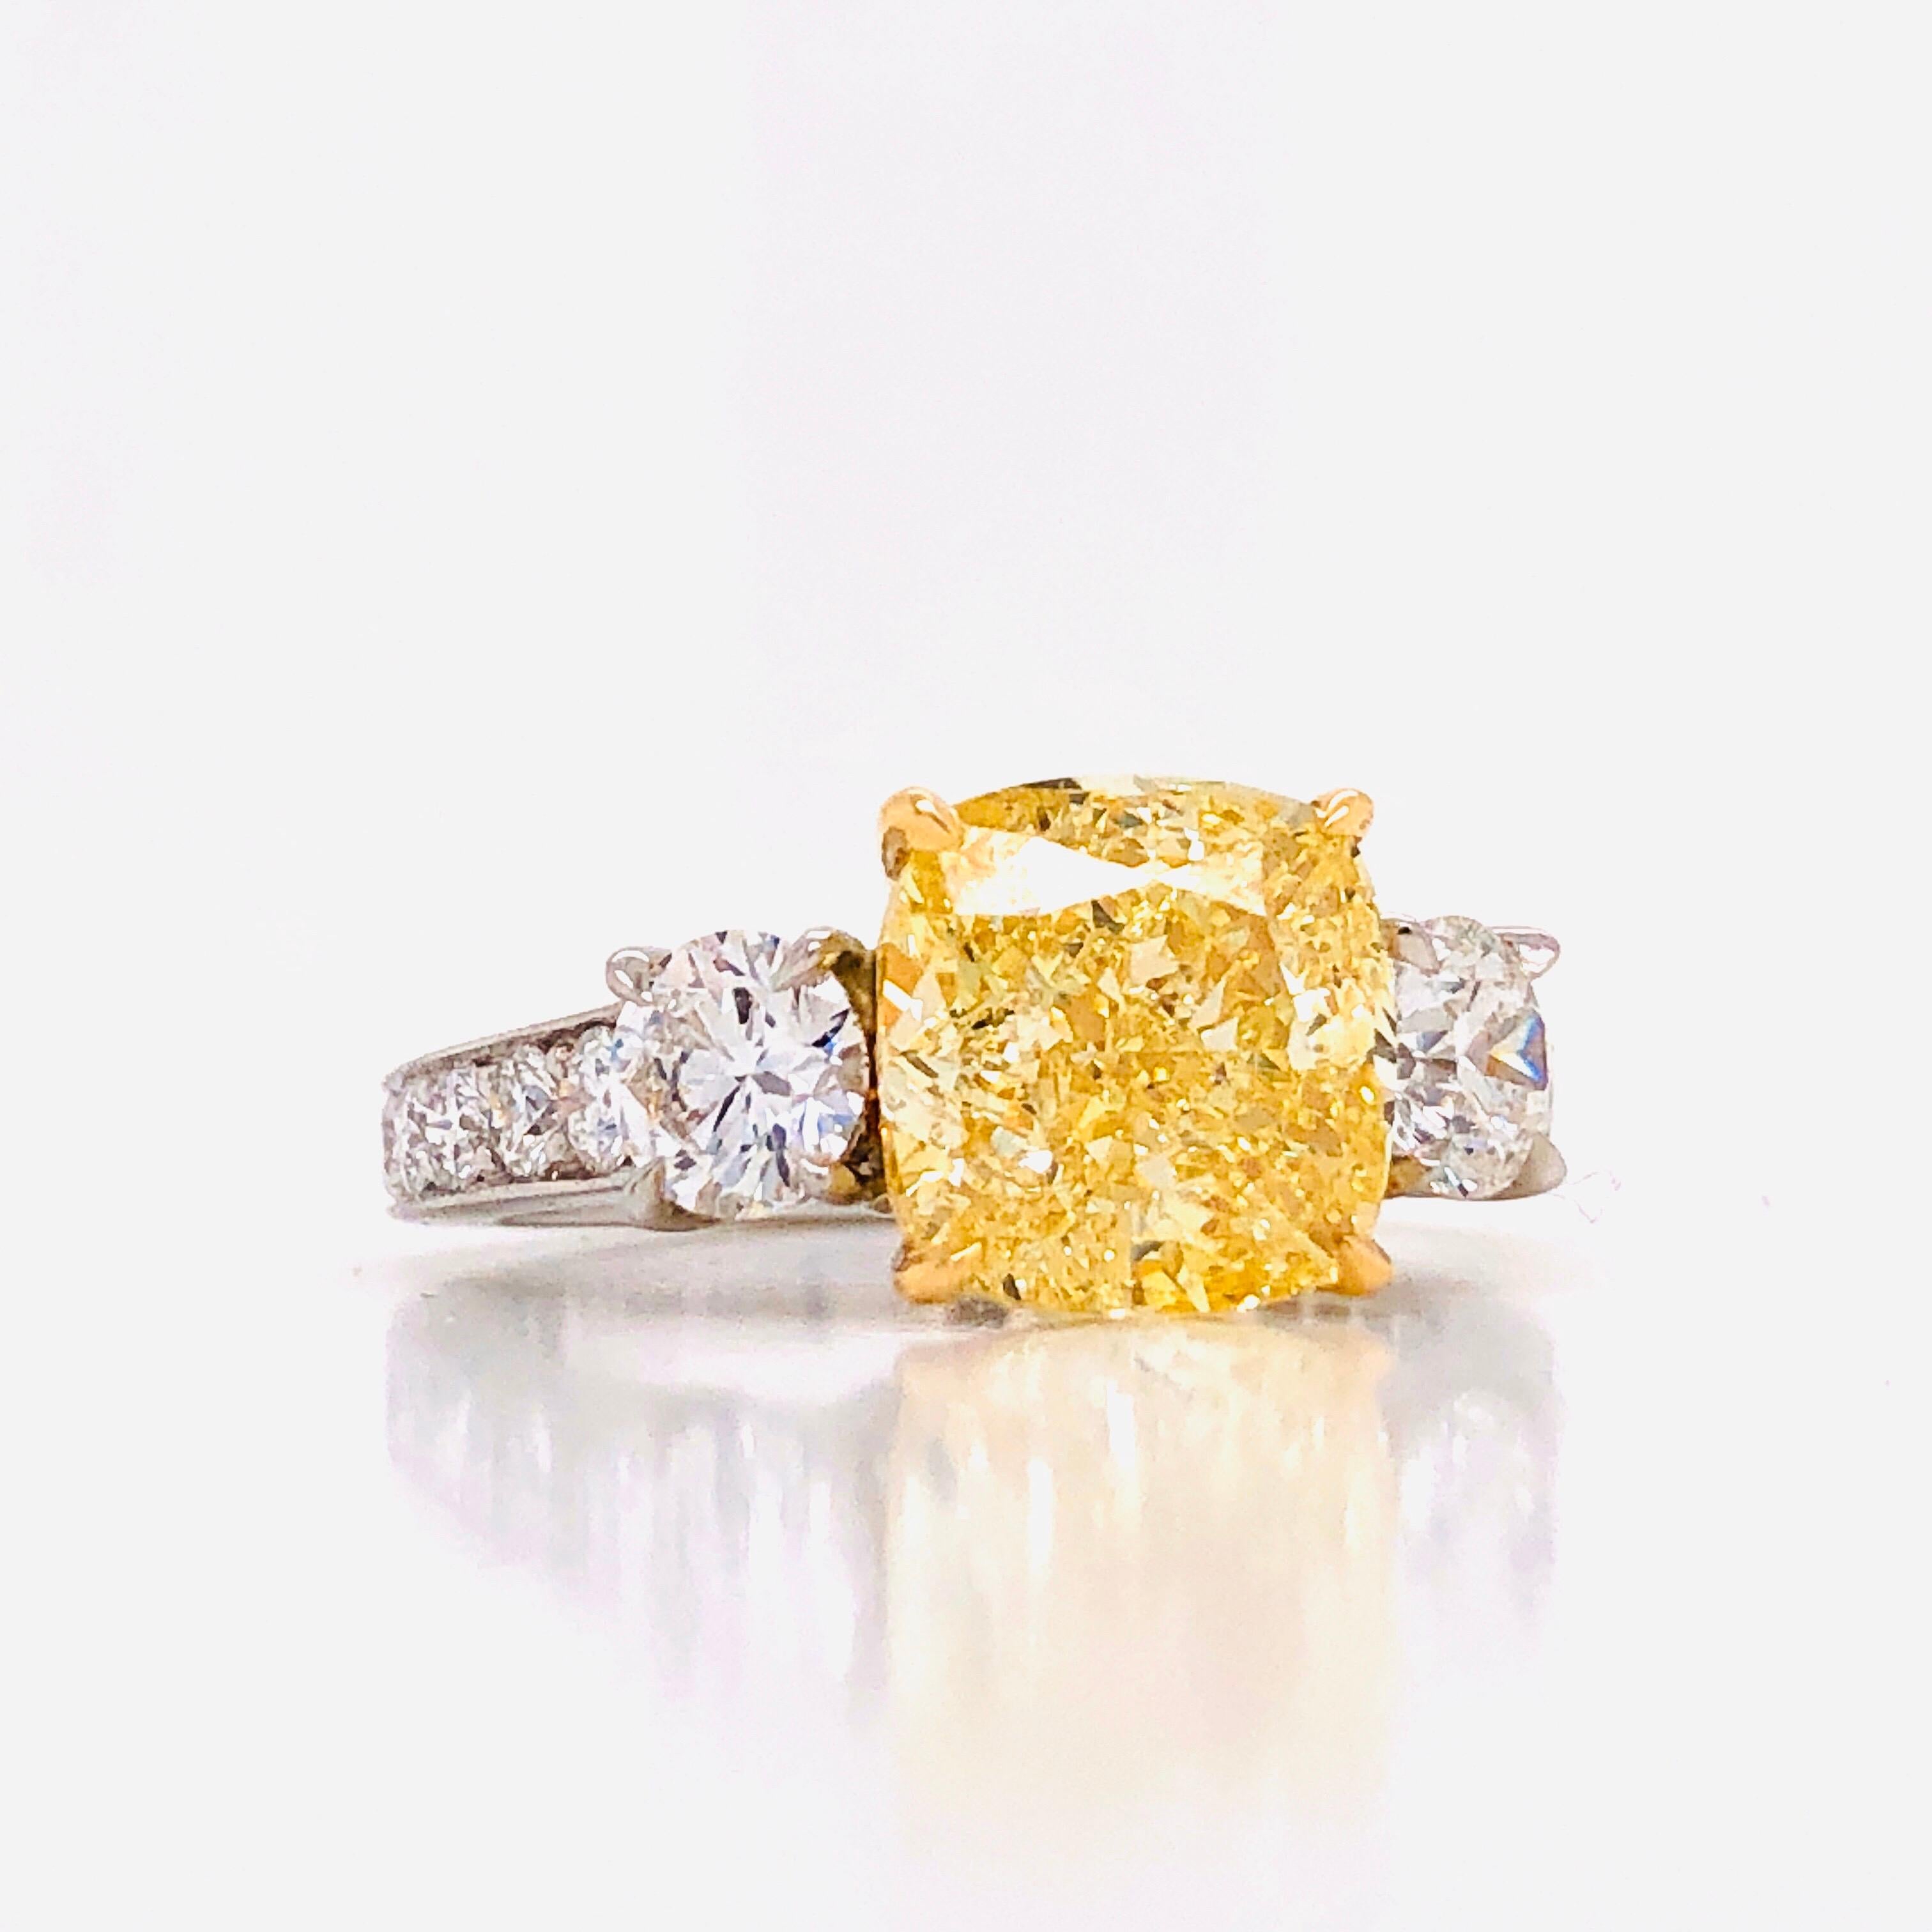 Emilio Jewelry 4.91 Carat GIA Certified Fancy Yellow Diamond Ring
This amazing ring is unique and well thought out before Emilio designed it! Most women today want a ring that is striking, yet humble enough to wear to perform everyday errands. This